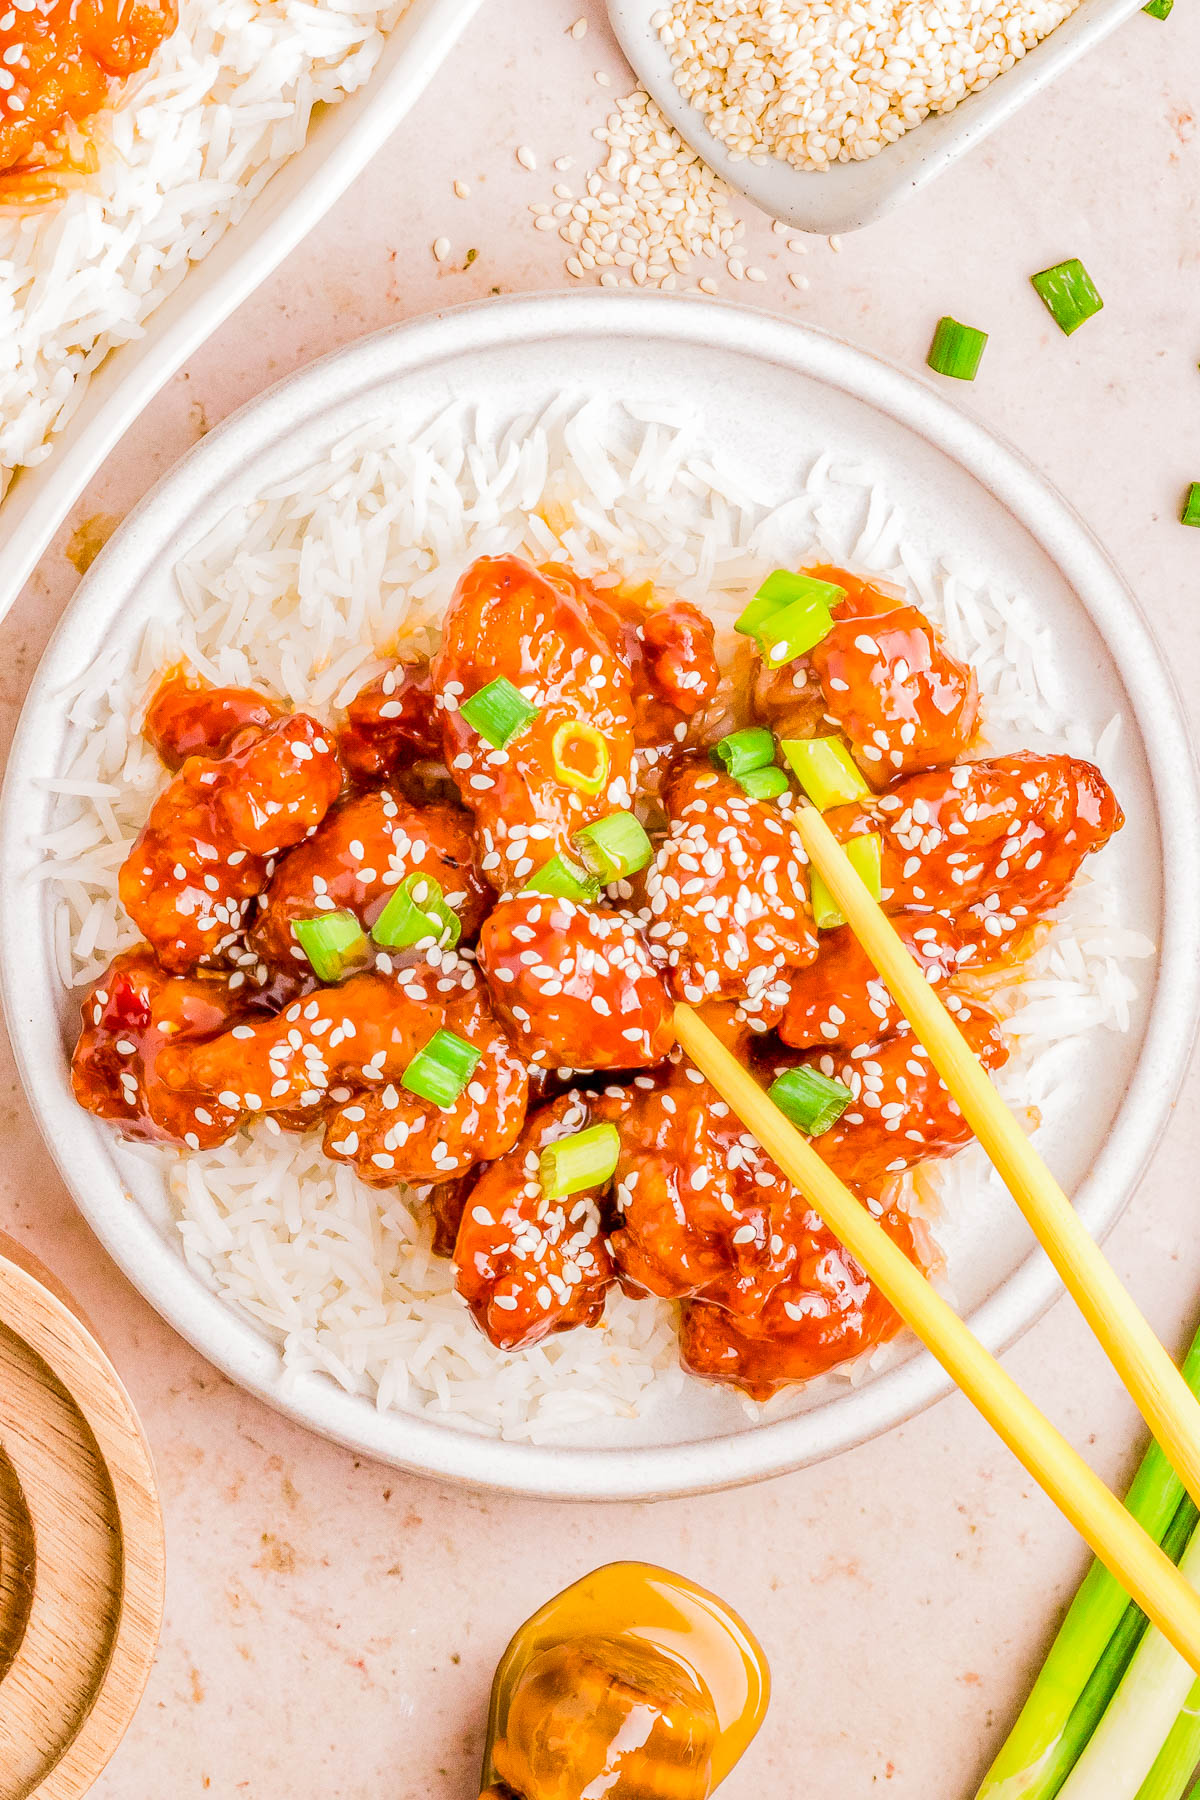 A plate of sesame chicken garnished with sesame seeds and green onions, served over white rice, with chopsticks on the side.